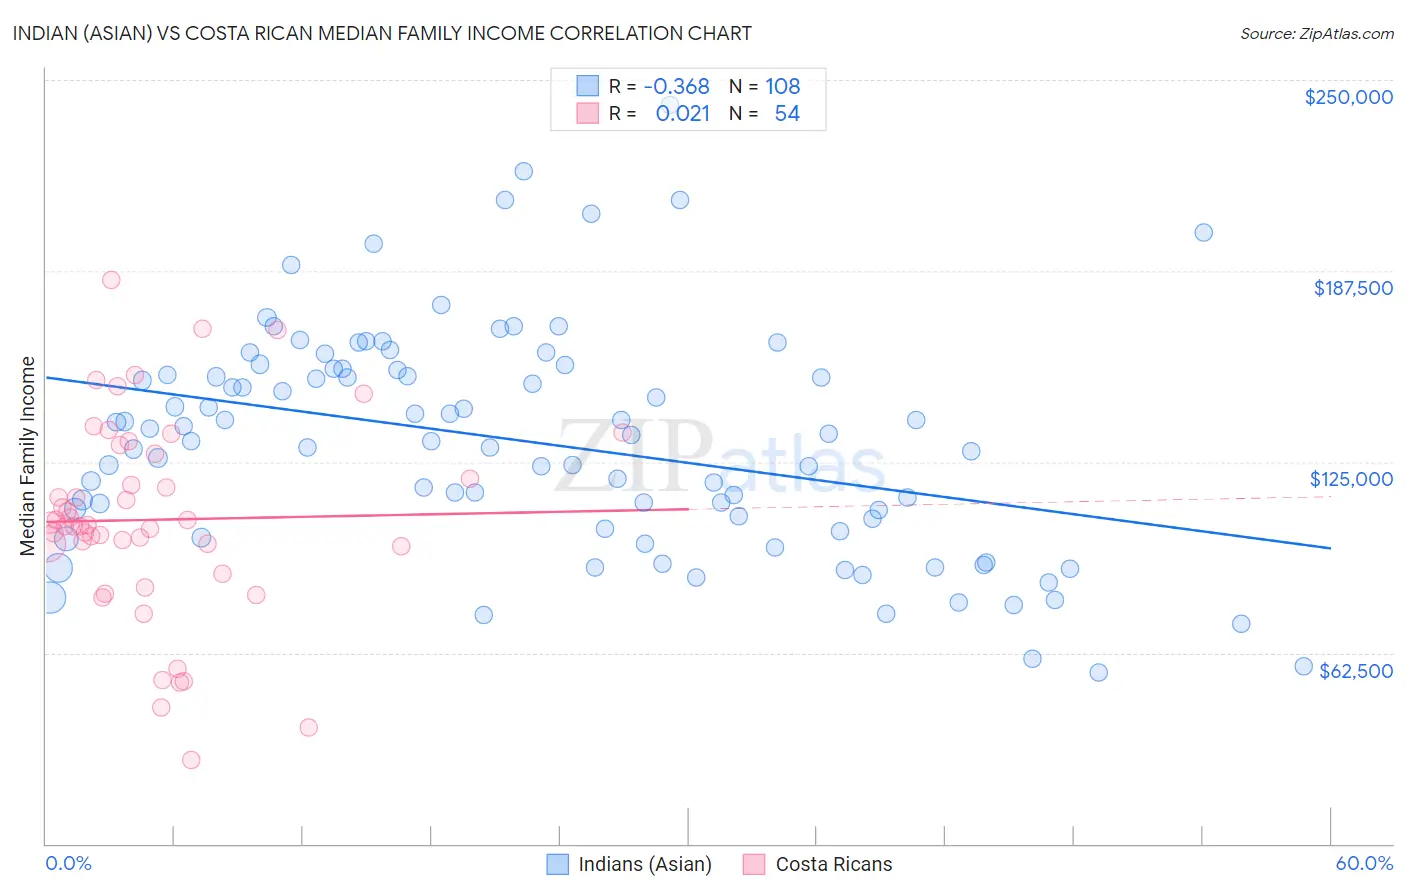 Indian (Asian) vs Costa Rican Median Family Income